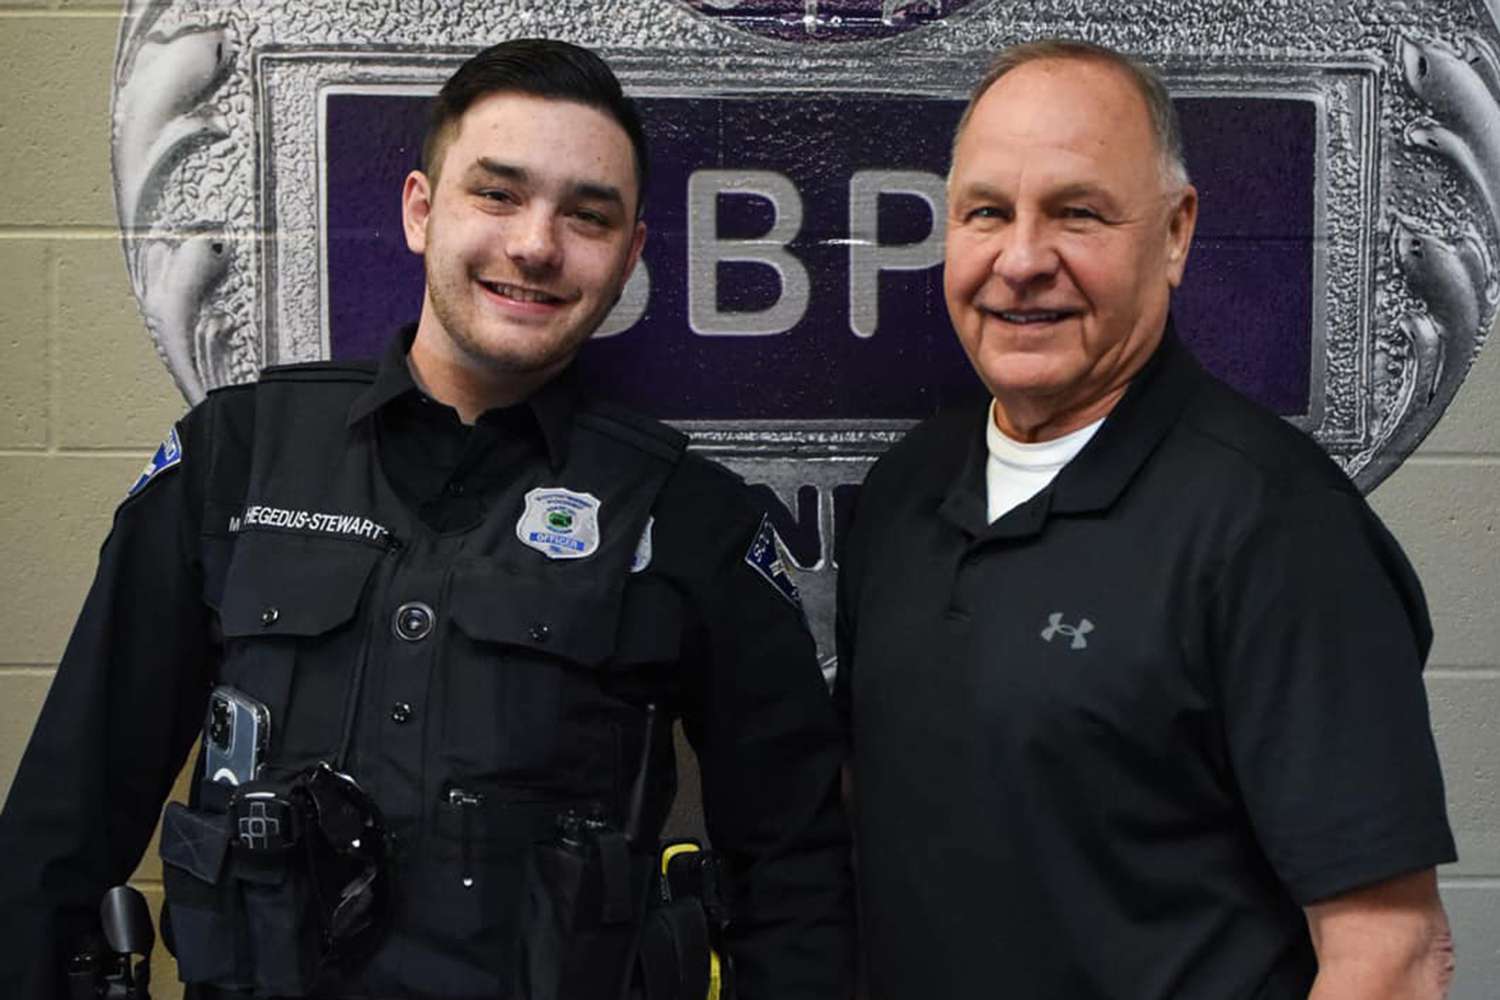 Young Cop Reunites with Retired Officer Who Found Him Abandoned as a Baby Nearly 25 Years Ago